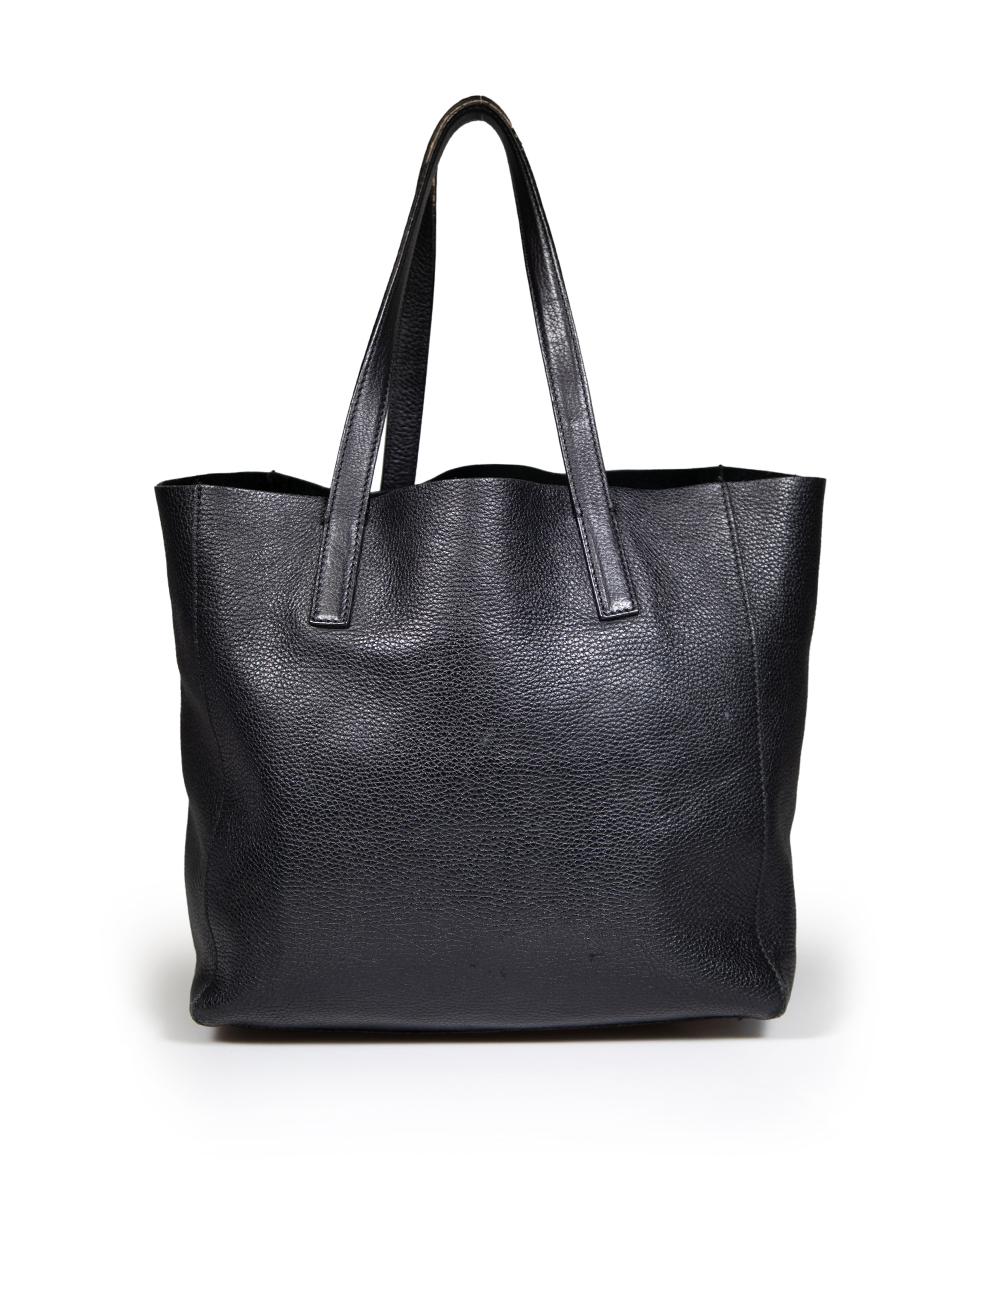 Etro Black Leather Medium Tote Bag In Good Condition For Sale In London, GB